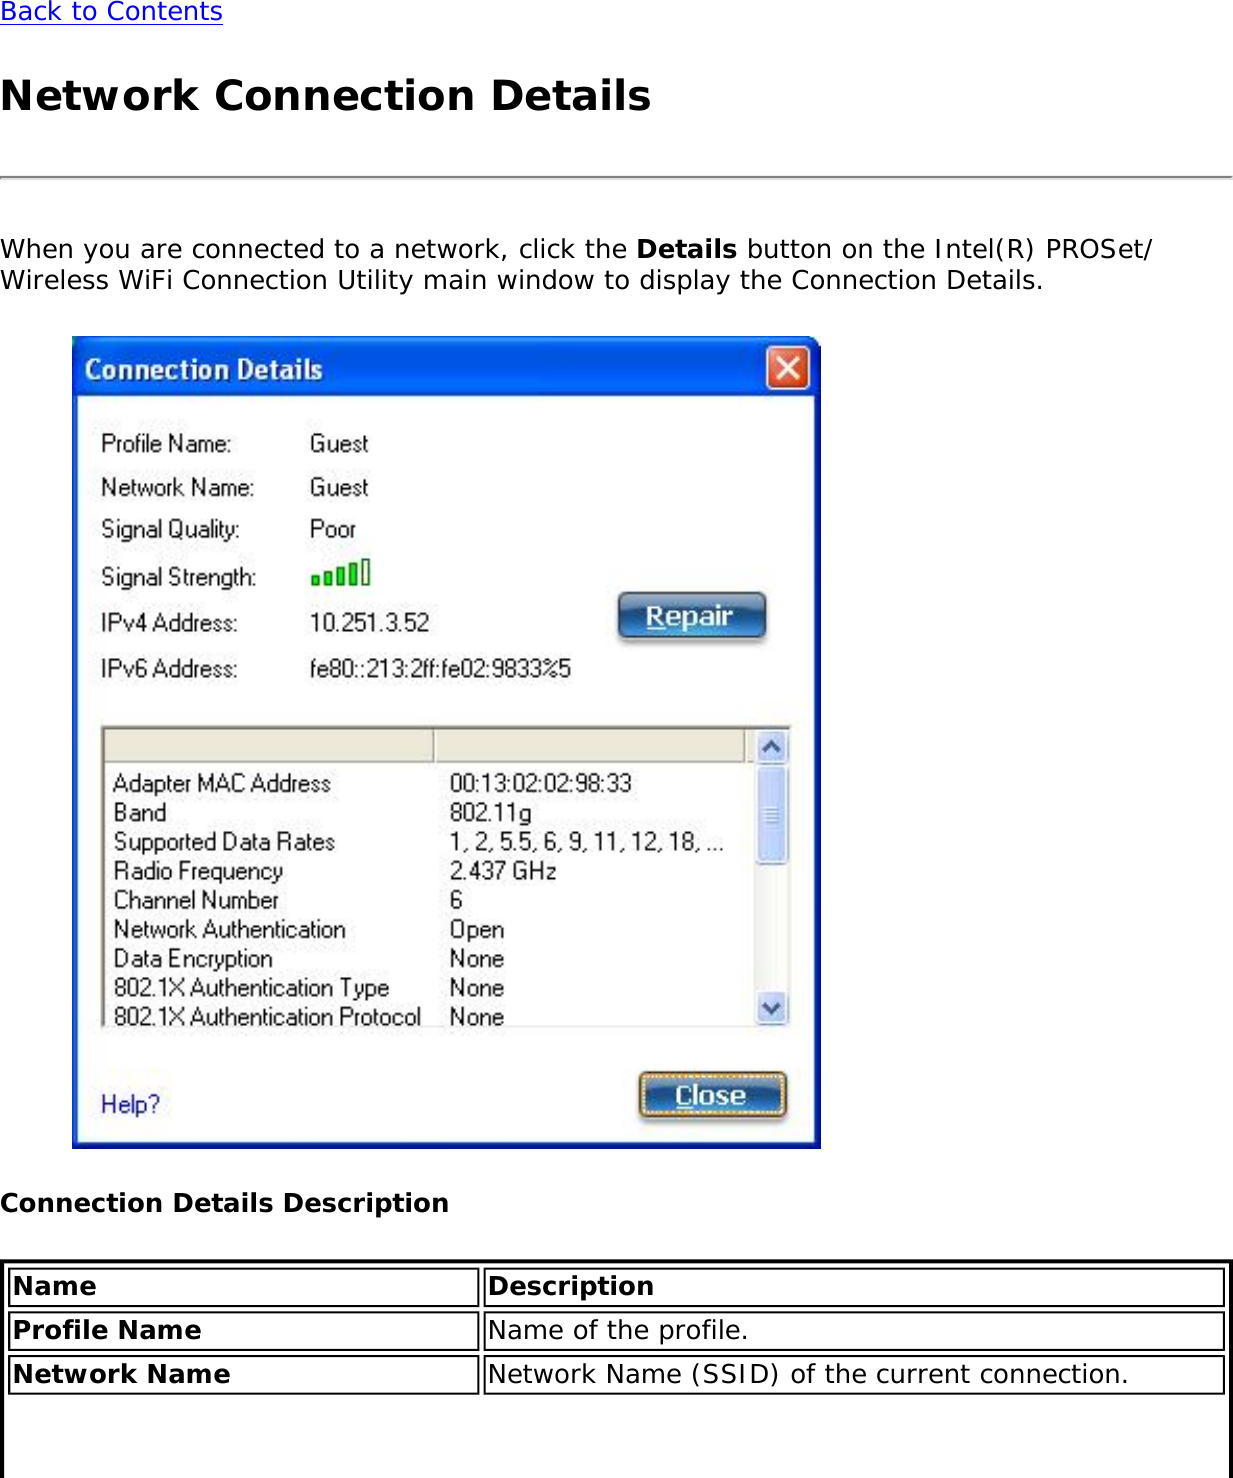 Back to ContentsNetwork Connection DetailsWhen you are connected to a network, click the Details button on the Intel(R) PROSet/Wireless WiFi Connection Utility main window to display the Connection Details. Connection Details DescriptionName DescriptionProfile Name Name of the profile. Network Name Network Name (SSID) of the current connection.